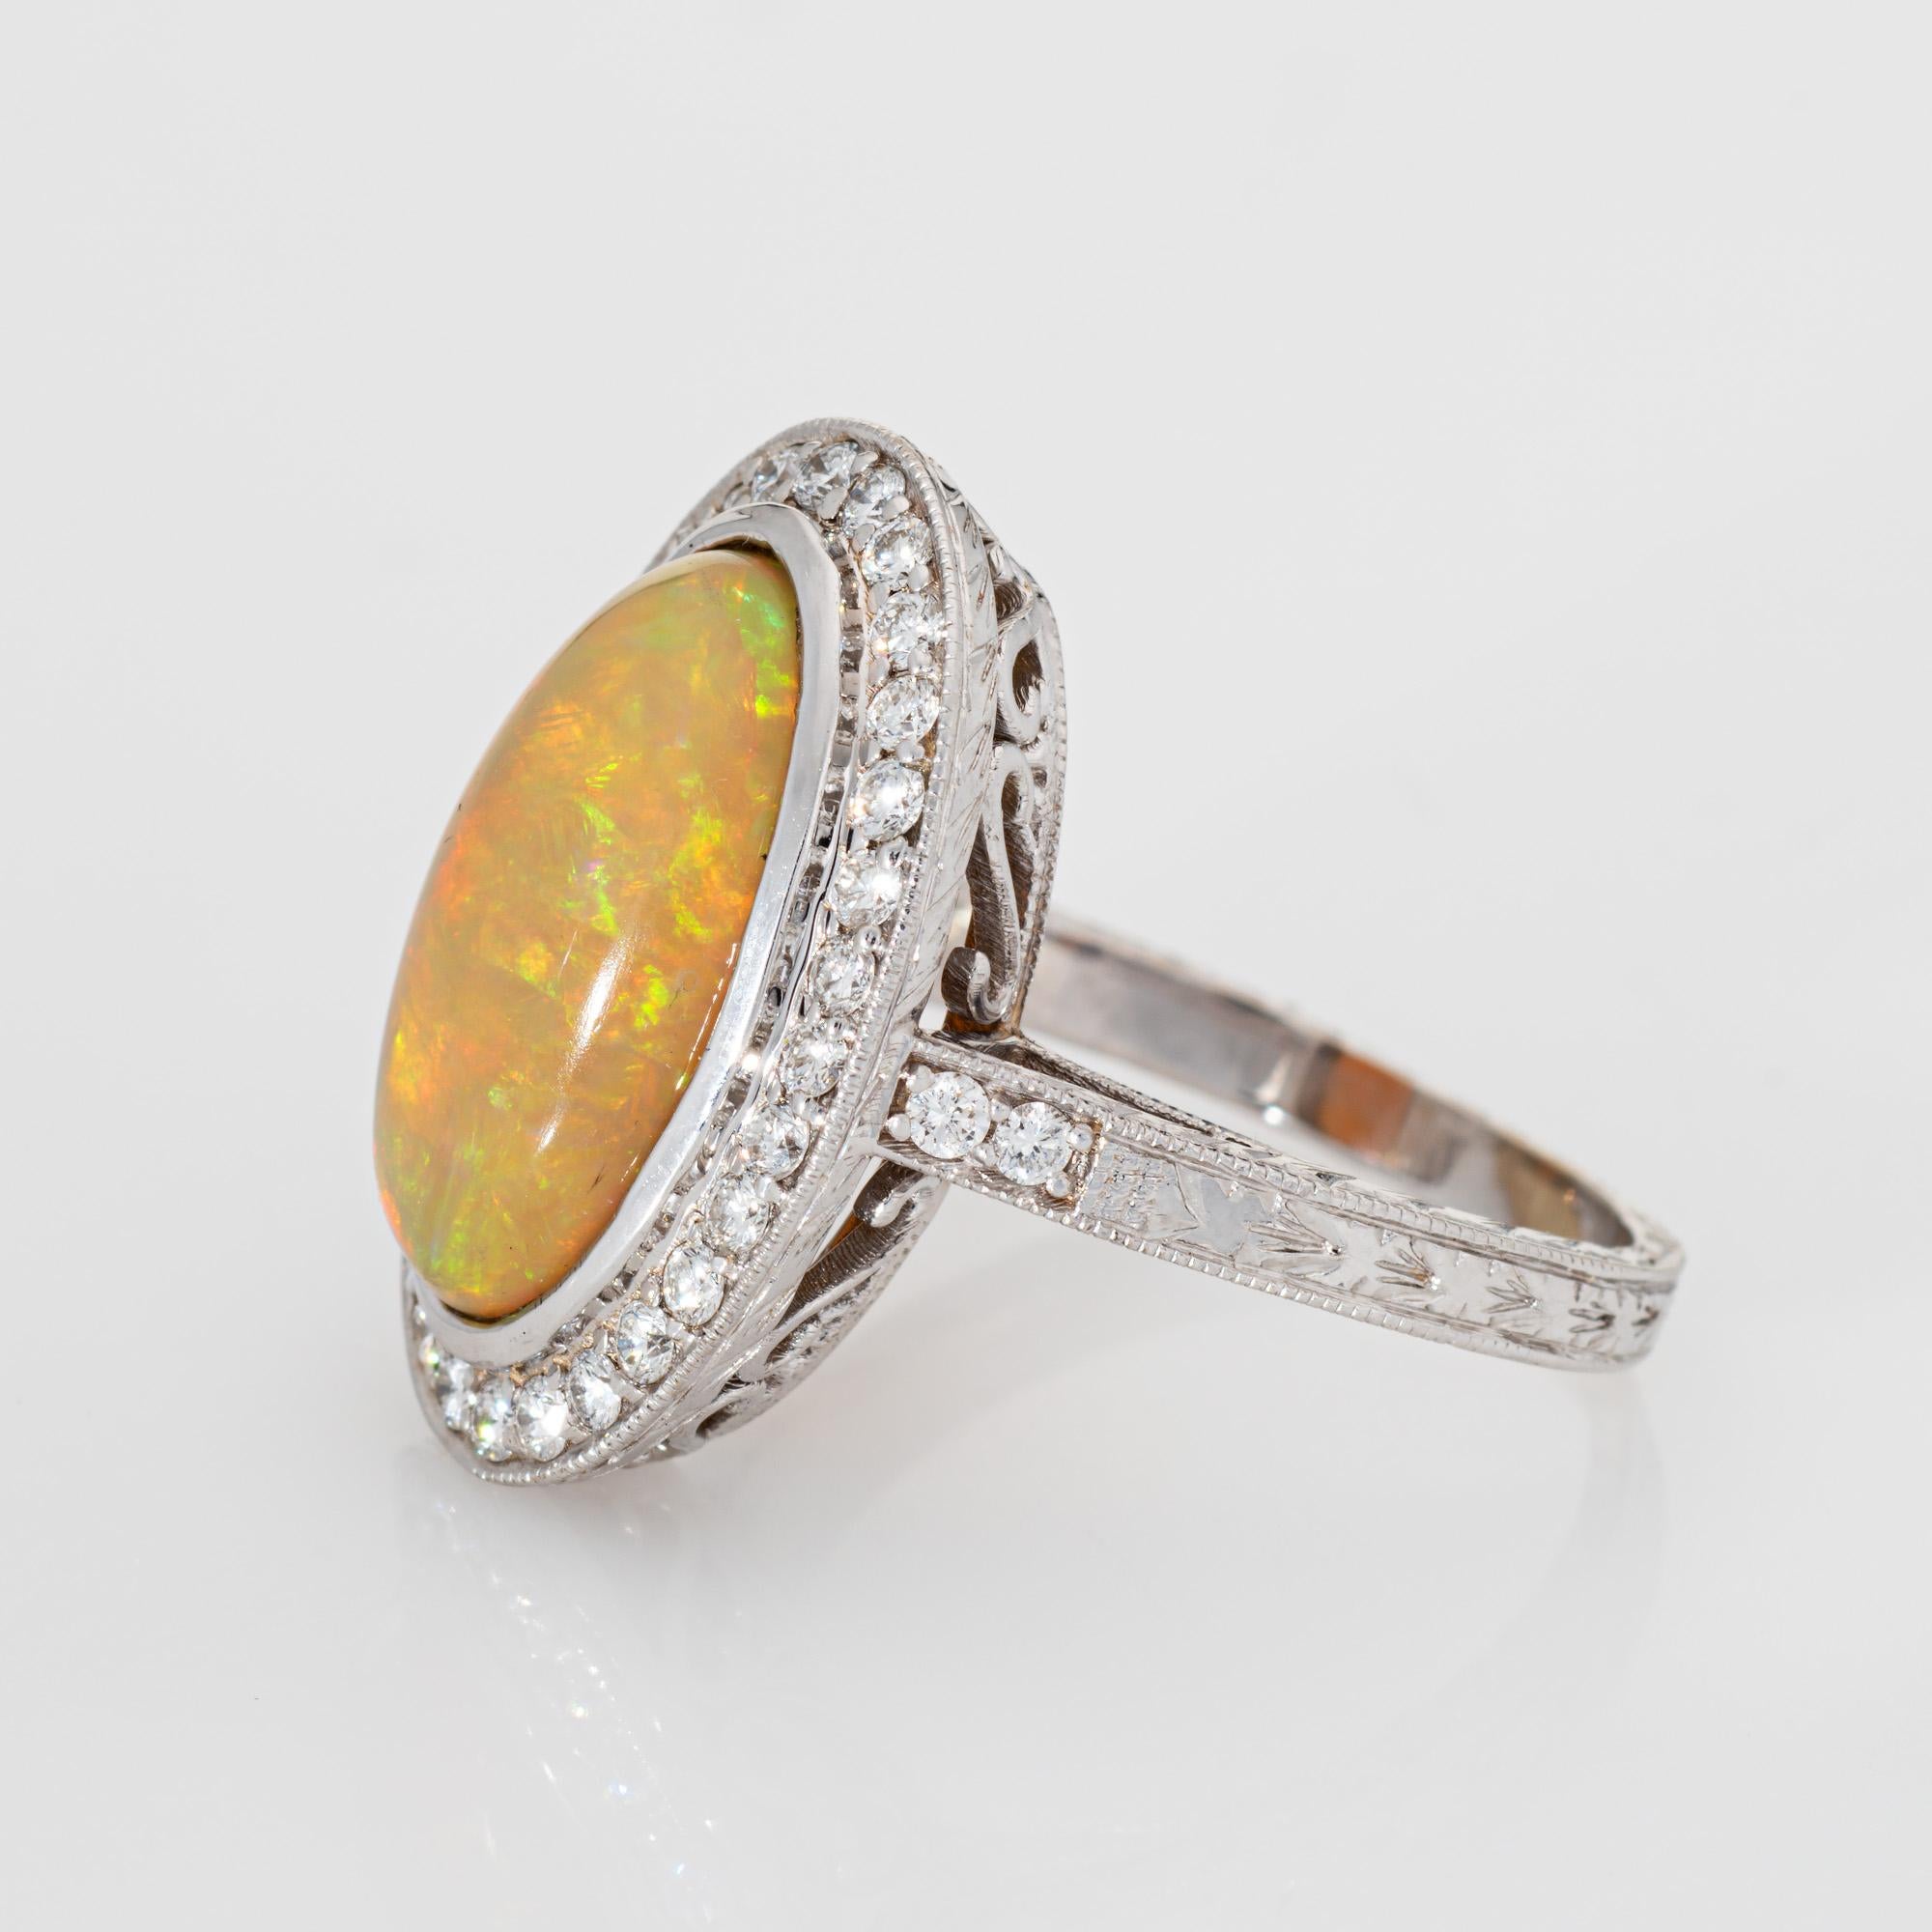 Cabochon Fire Opal Diamond Ring Large Oval Estate 18k White Gold Sz 9 Cocktail Fine Jewel For Sale